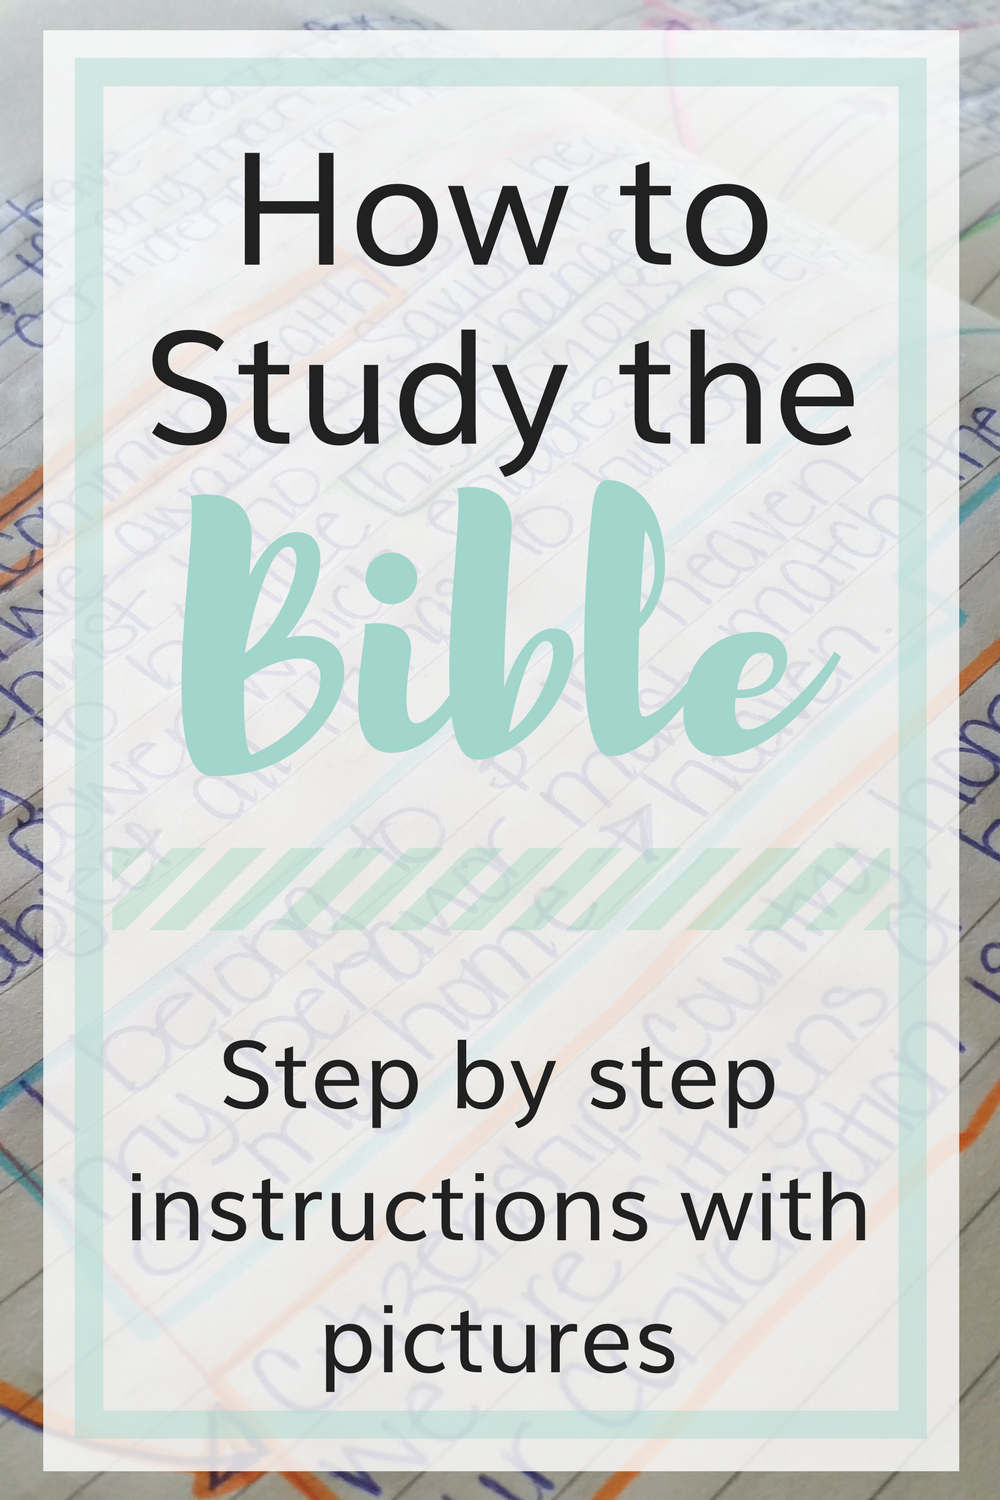 how-to-study-the-bible-philippians-3-the-littlest-way